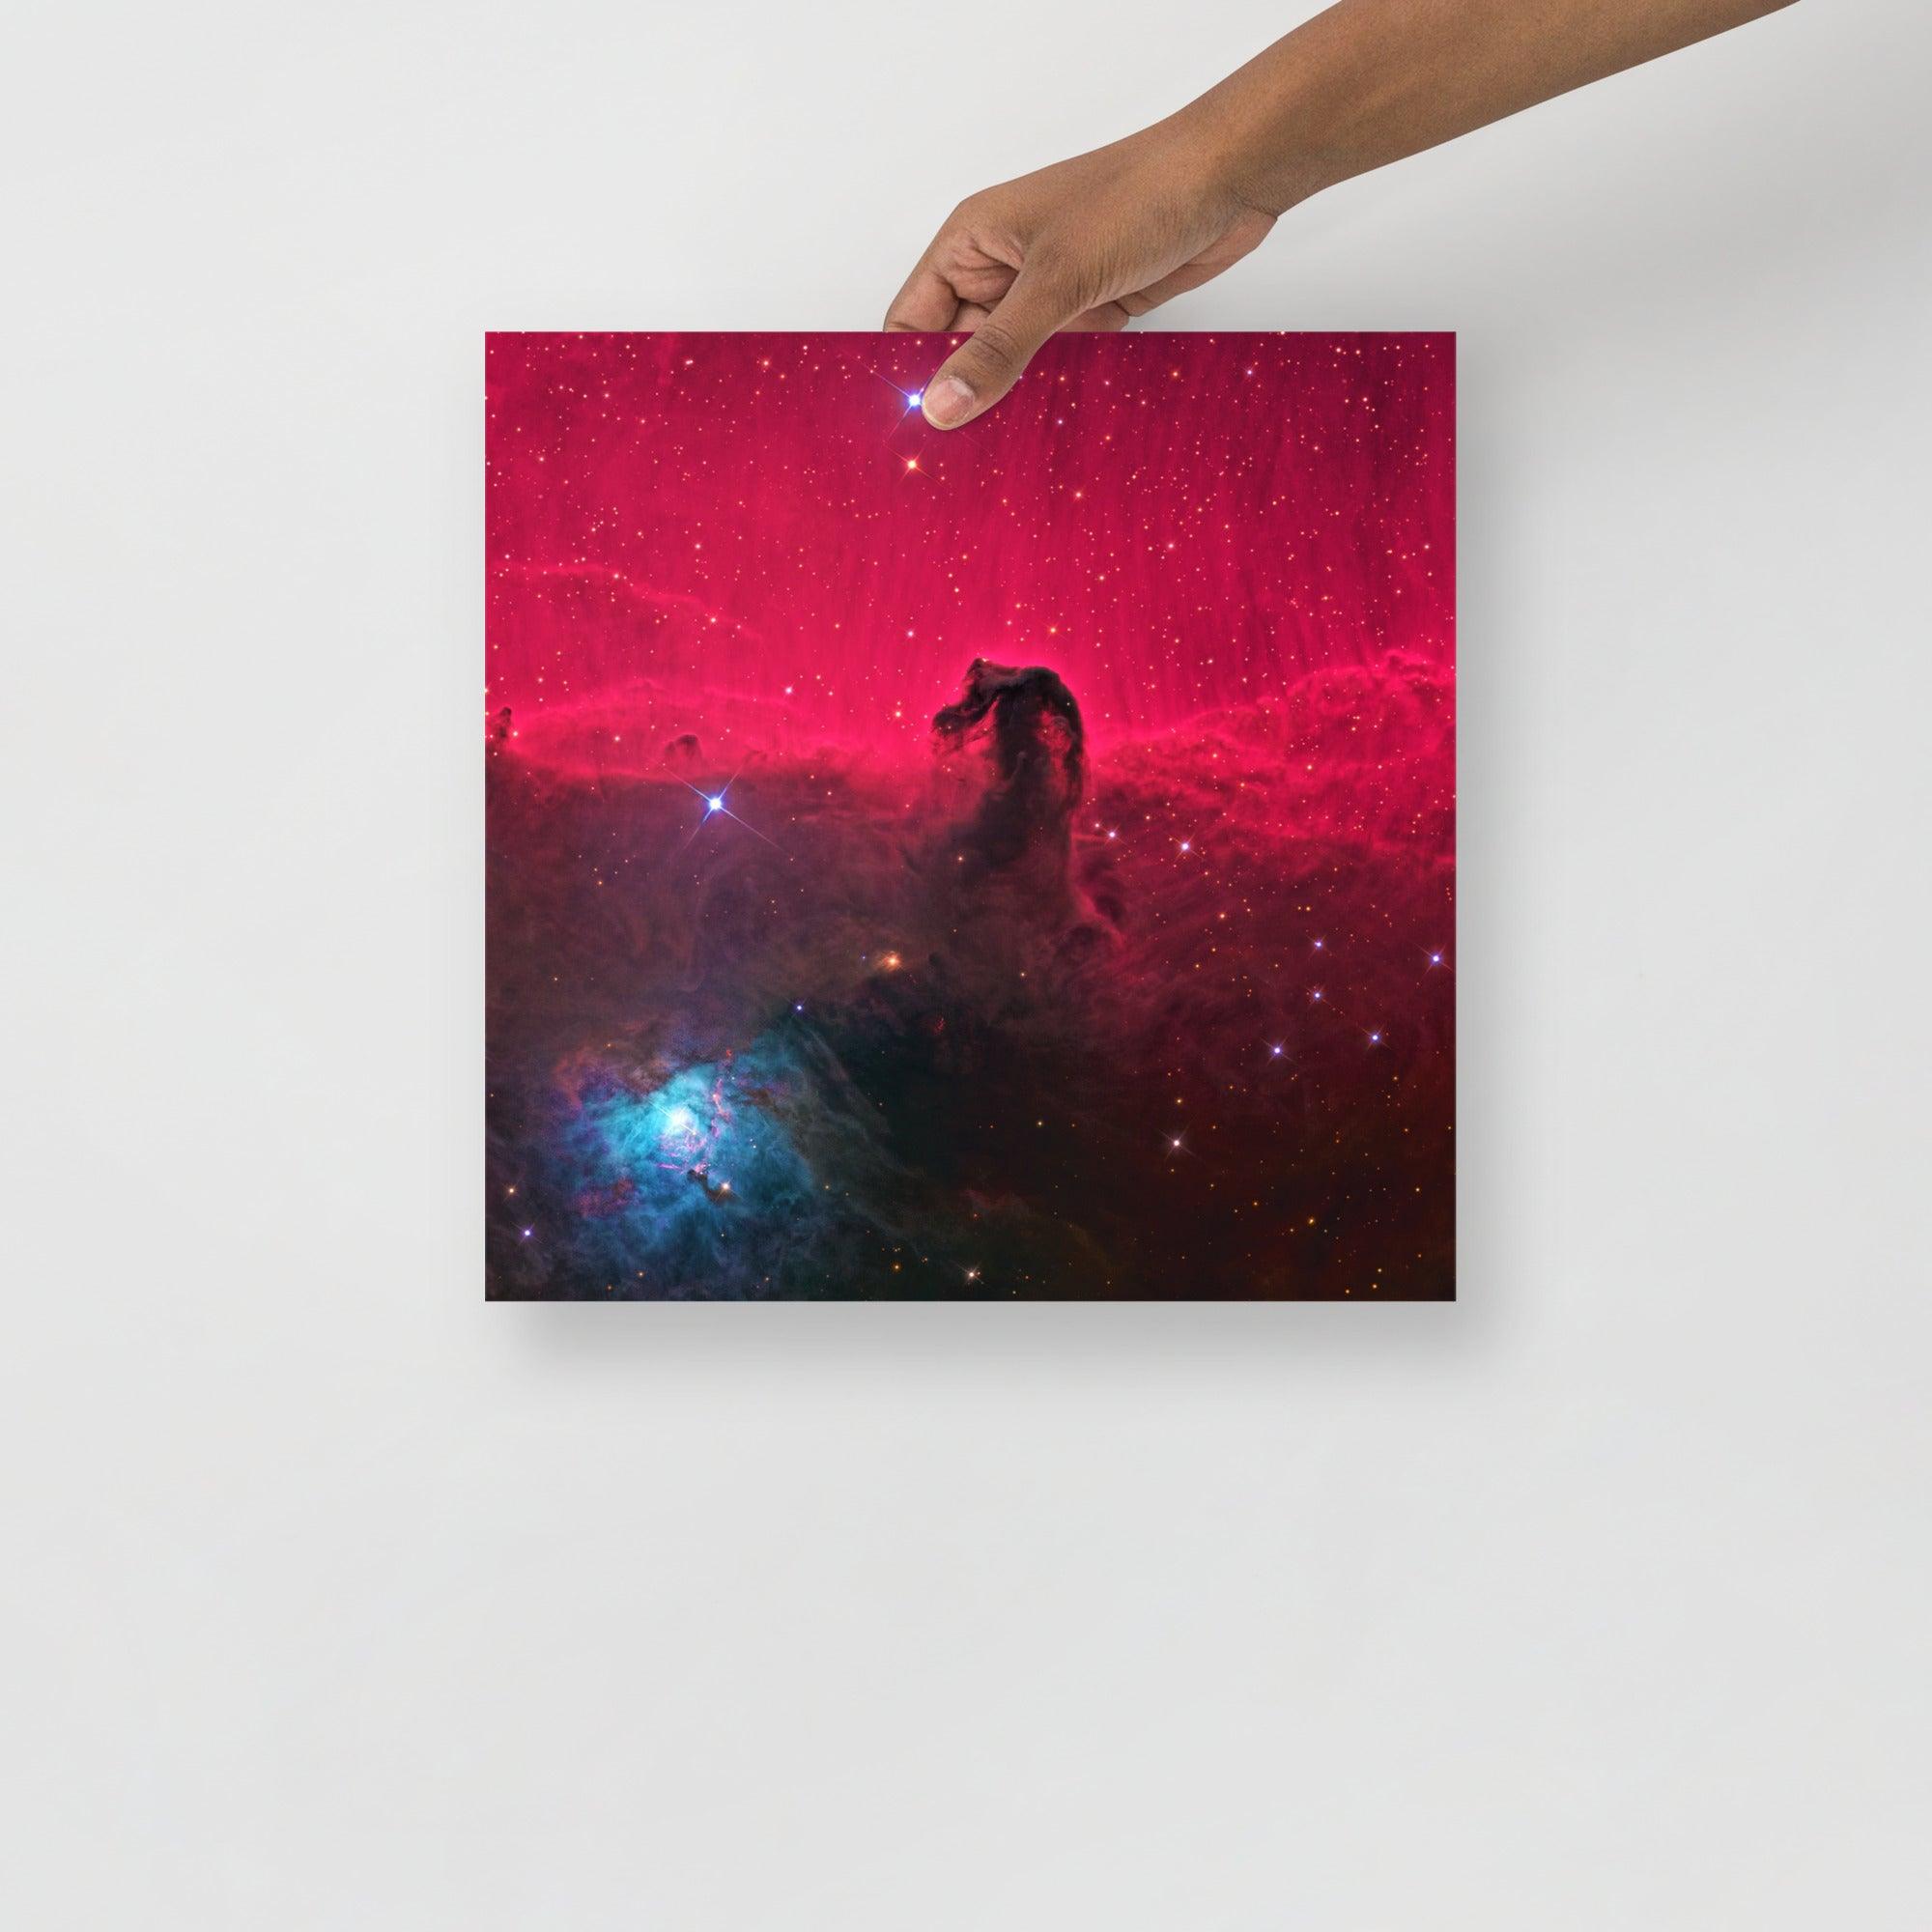 A Horsehead Nebula poster on a plain backdrop in size 14x14”.